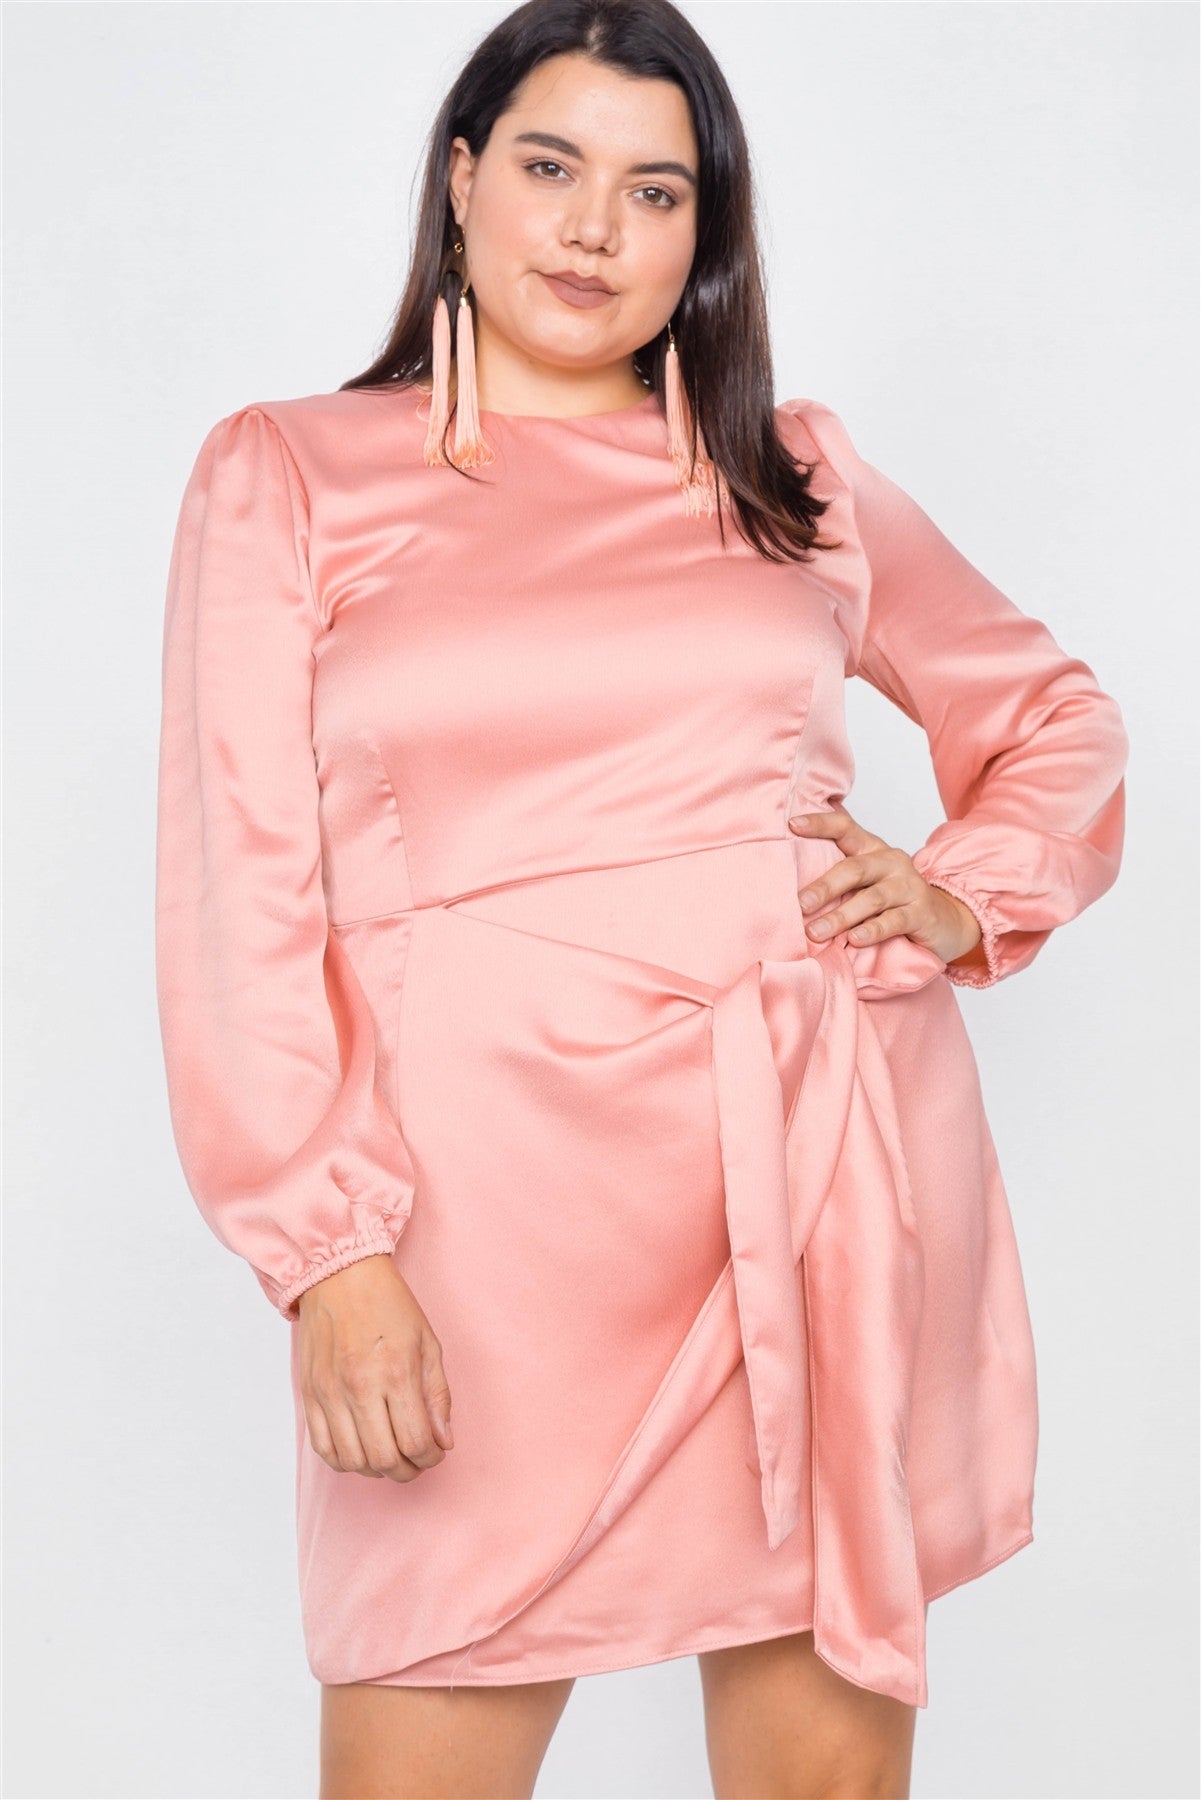 Plus Size Lovely Ladies 100% Polyester Silk Mock Wrap Square Neck Cinched Cuffs Chic Mini Dress (Salmon)